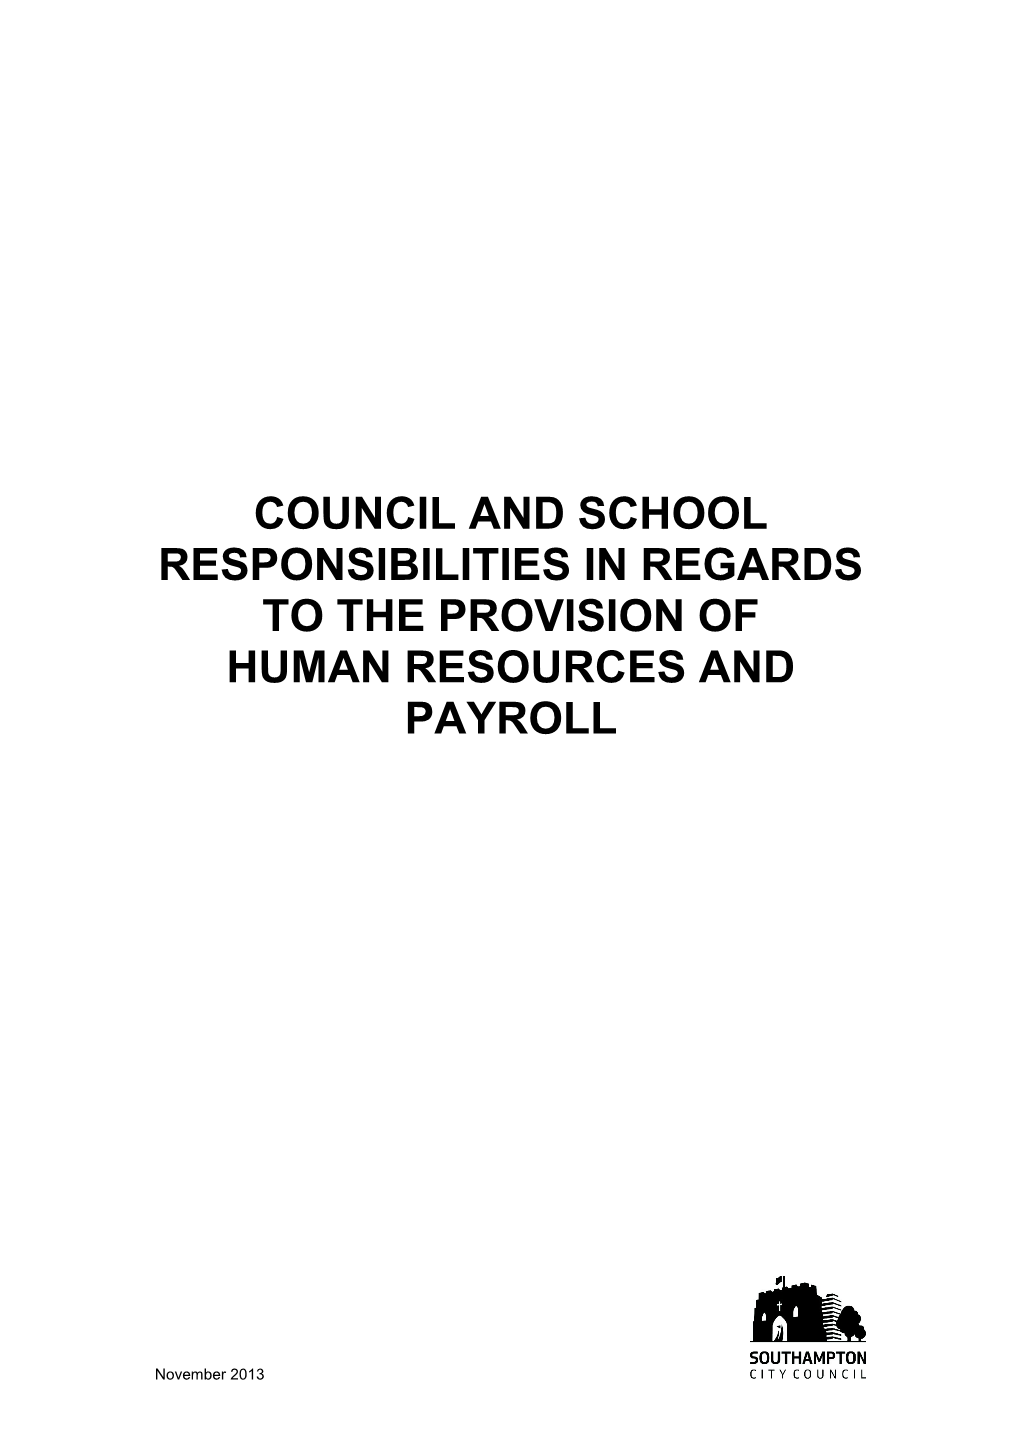 Council and School